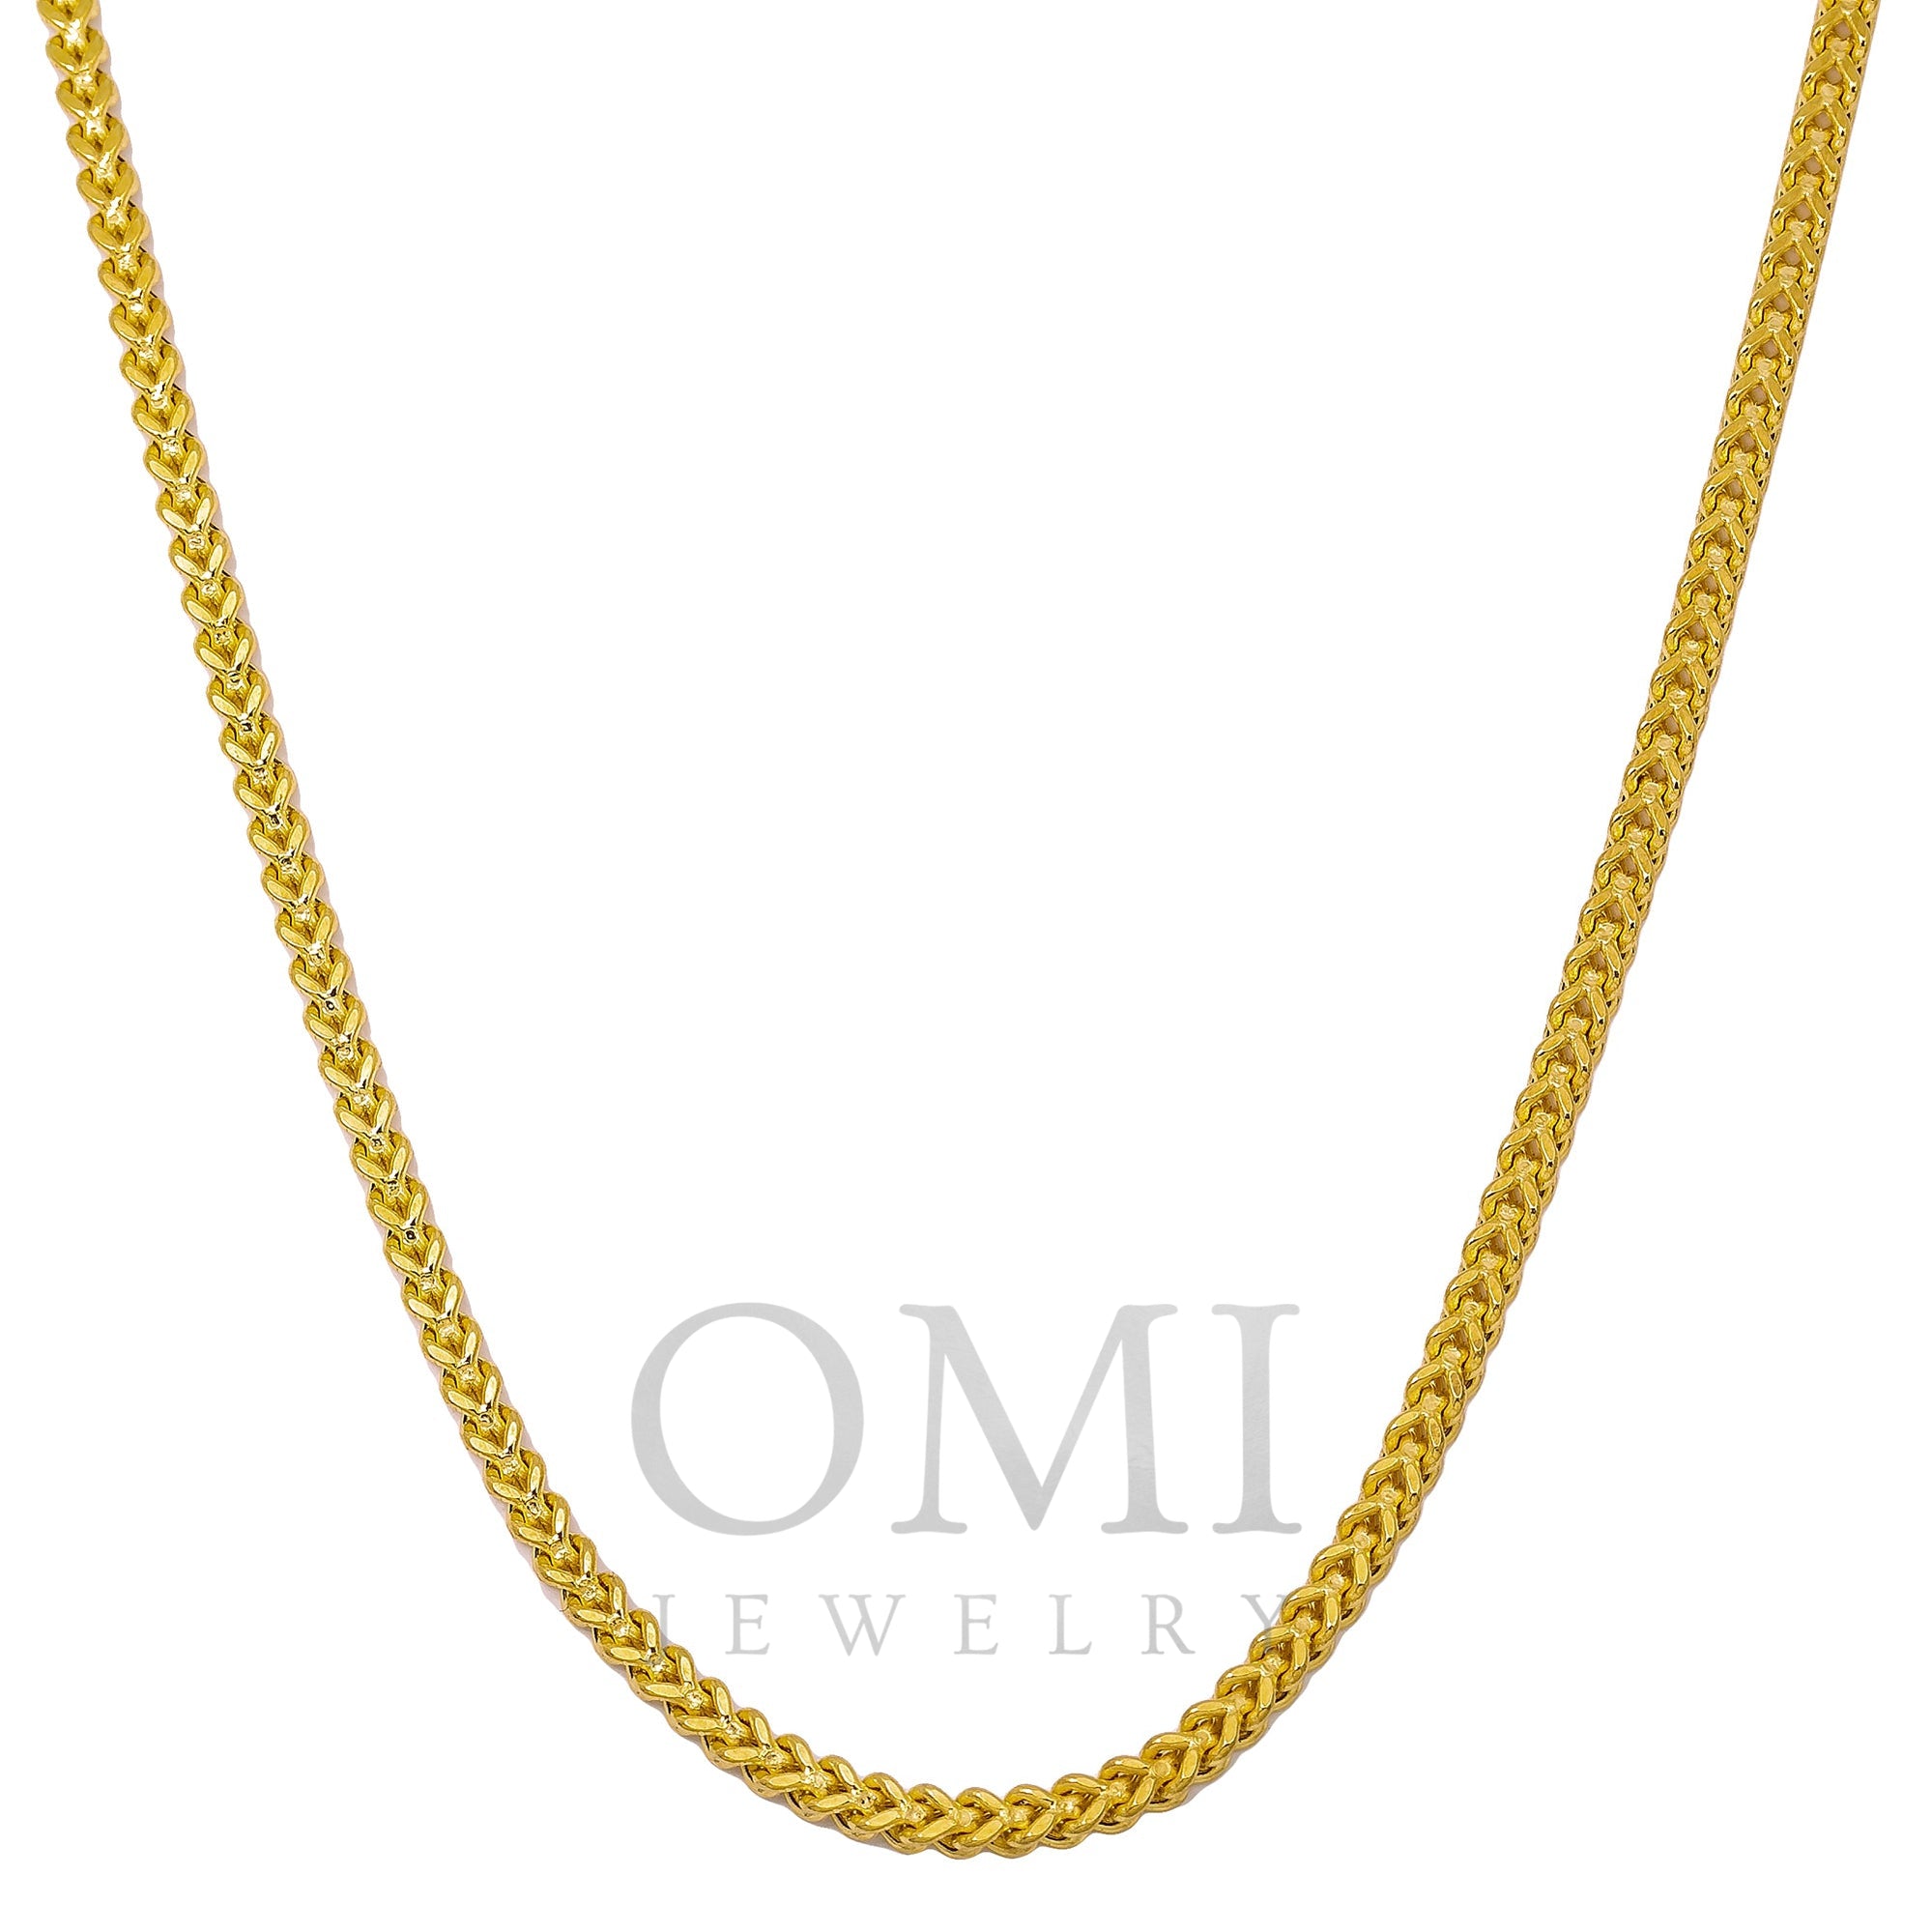 10K Yellow Gold 2.75mm Hollow Franco Chain Available In Sizes 18